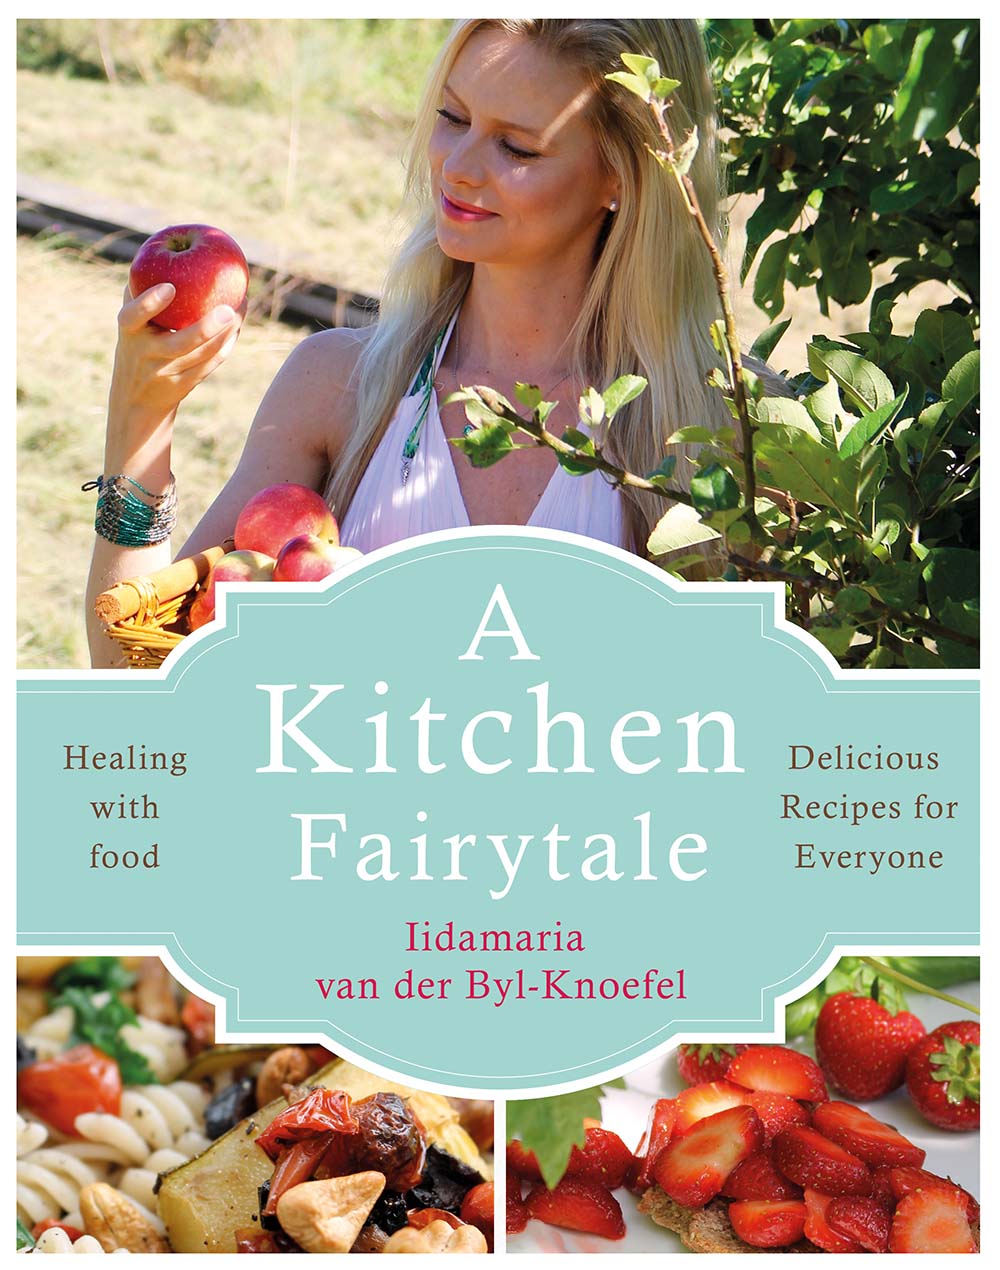 A Kitchen Fairytale Book Cover